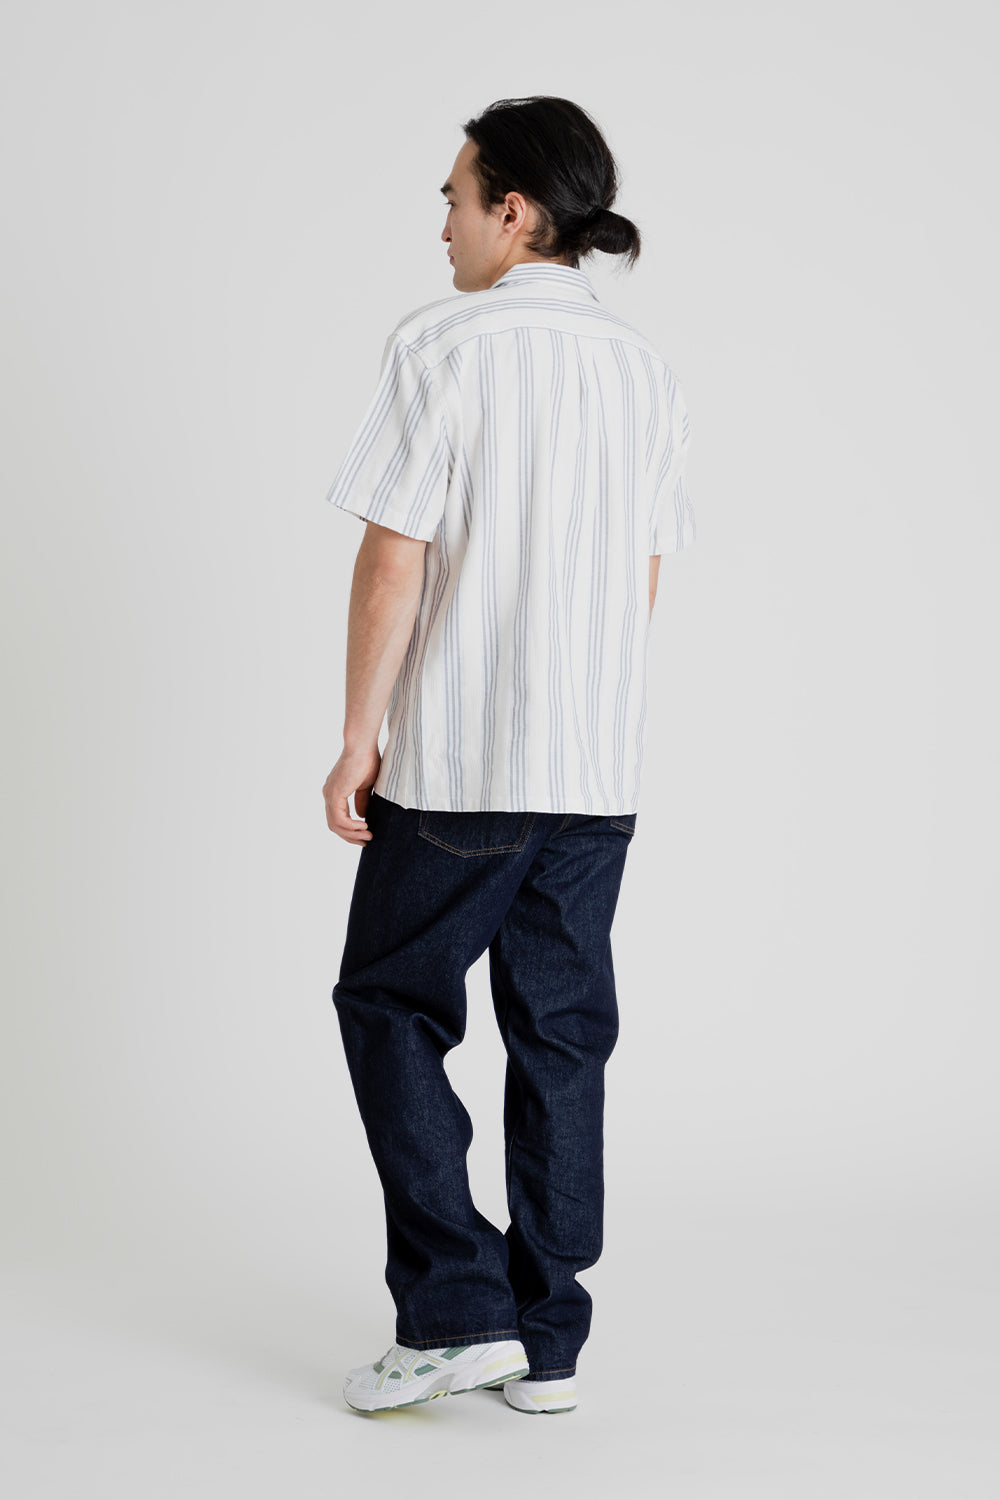 Foret Twig Shirt in Navy and Sandstone